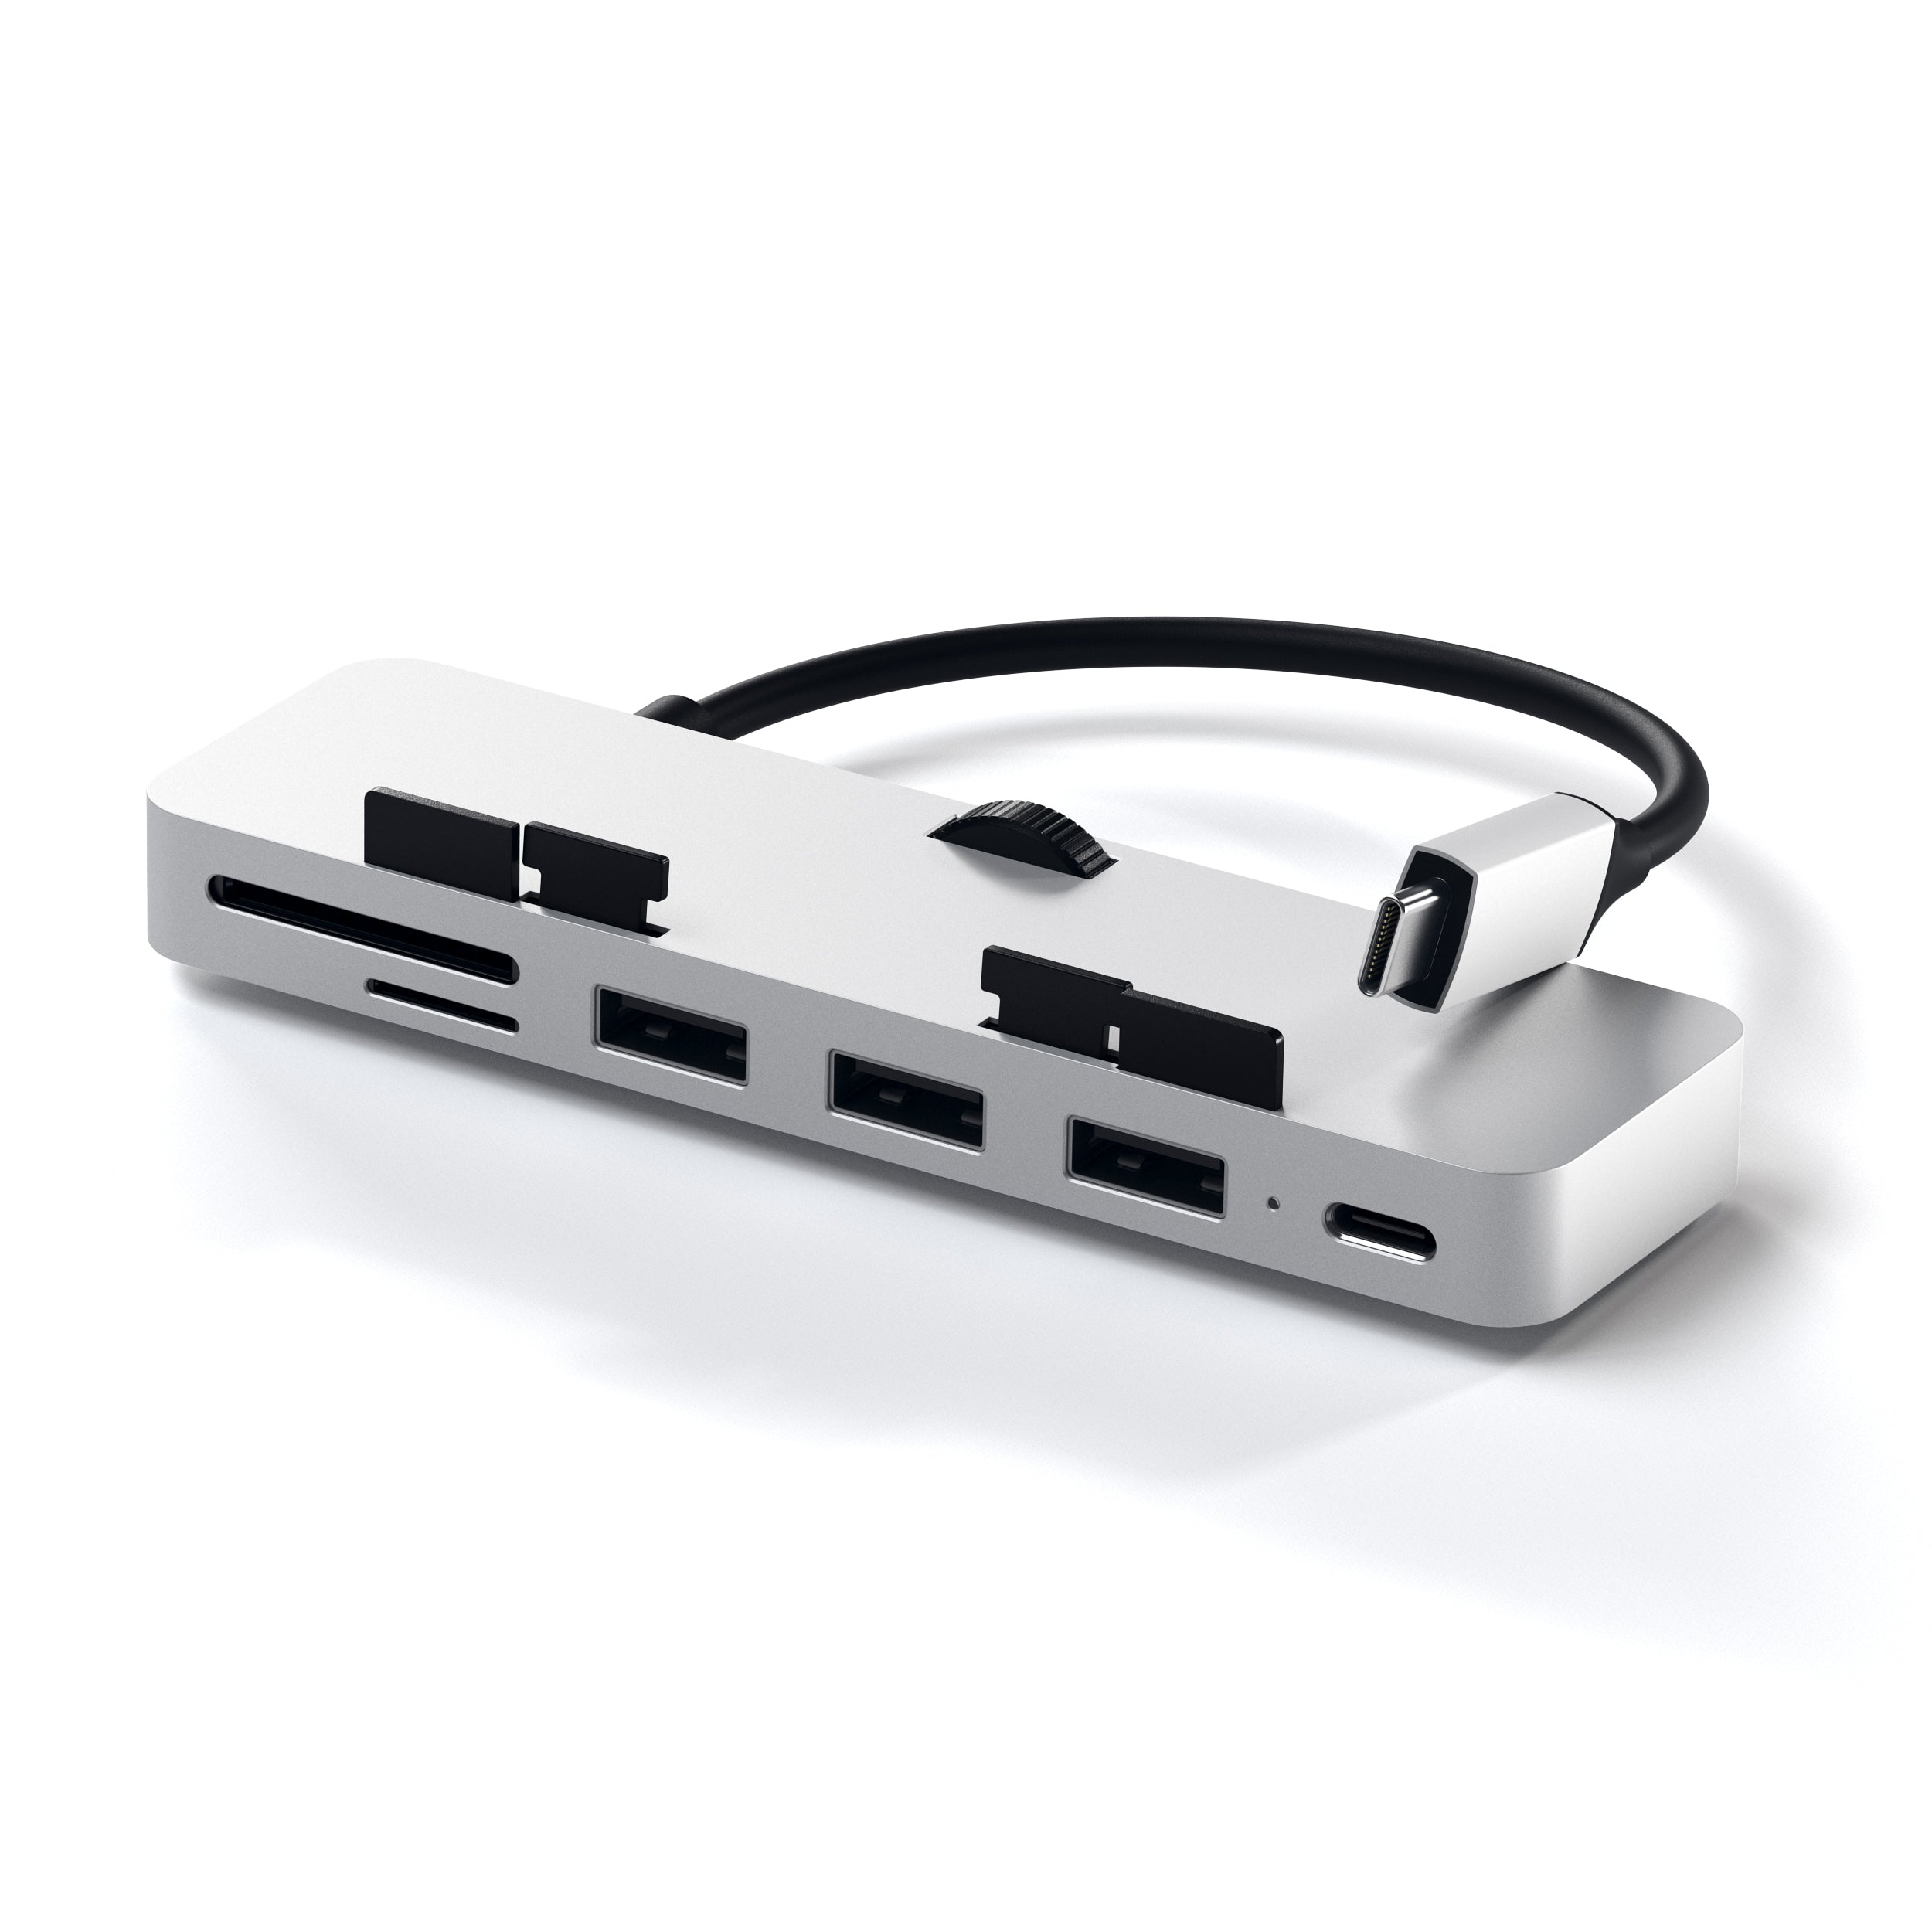 Satechi USB-C Clamp Hub Pro for iMac and iMac Pro Exclusively designed for the iMac and iMac Pro (2017 and later) the Satechi Clamp Hub Pro offers convenient access for all the most-loved ports and devices.This Satechi hub adds functionality to your deskt